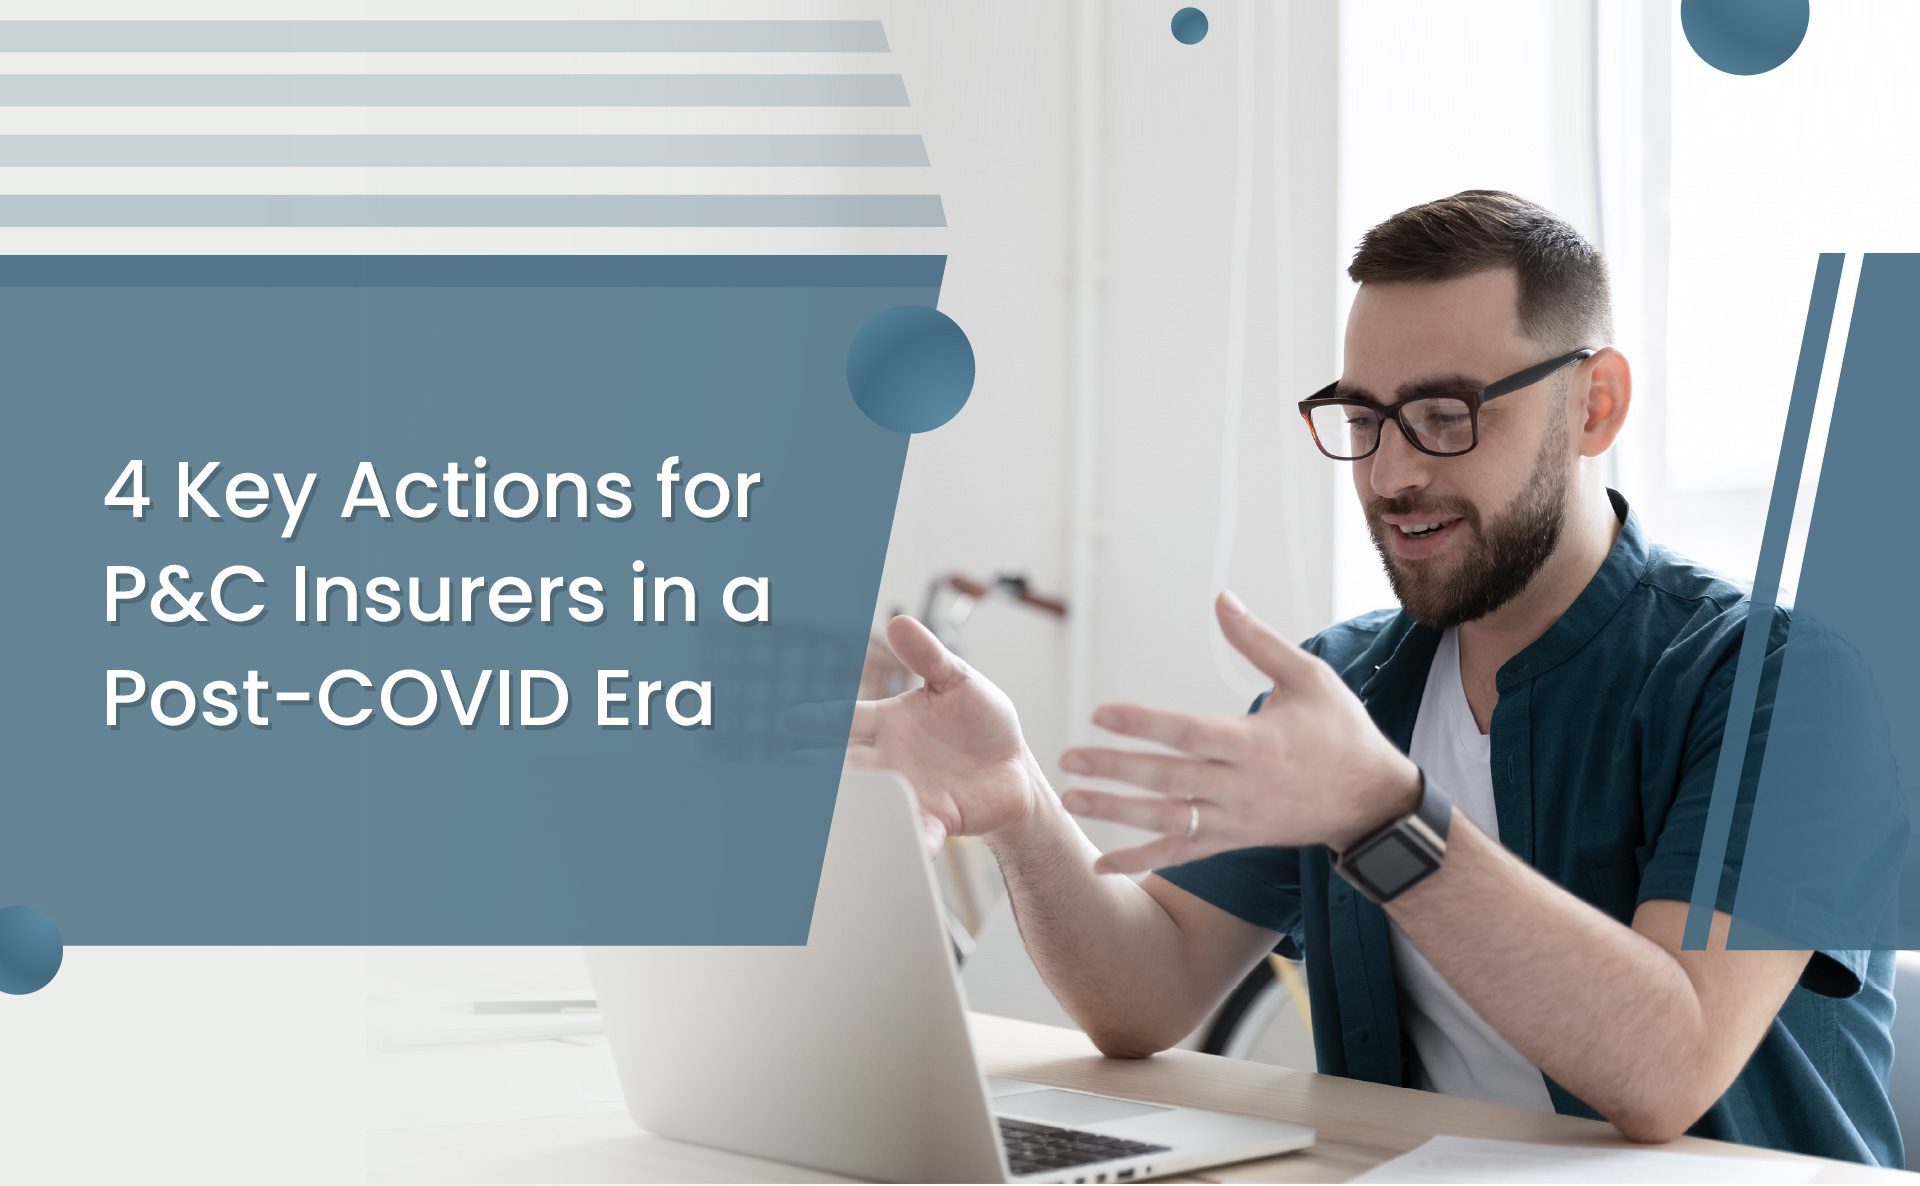 4 key actions for P&C insurers in a post-covid era